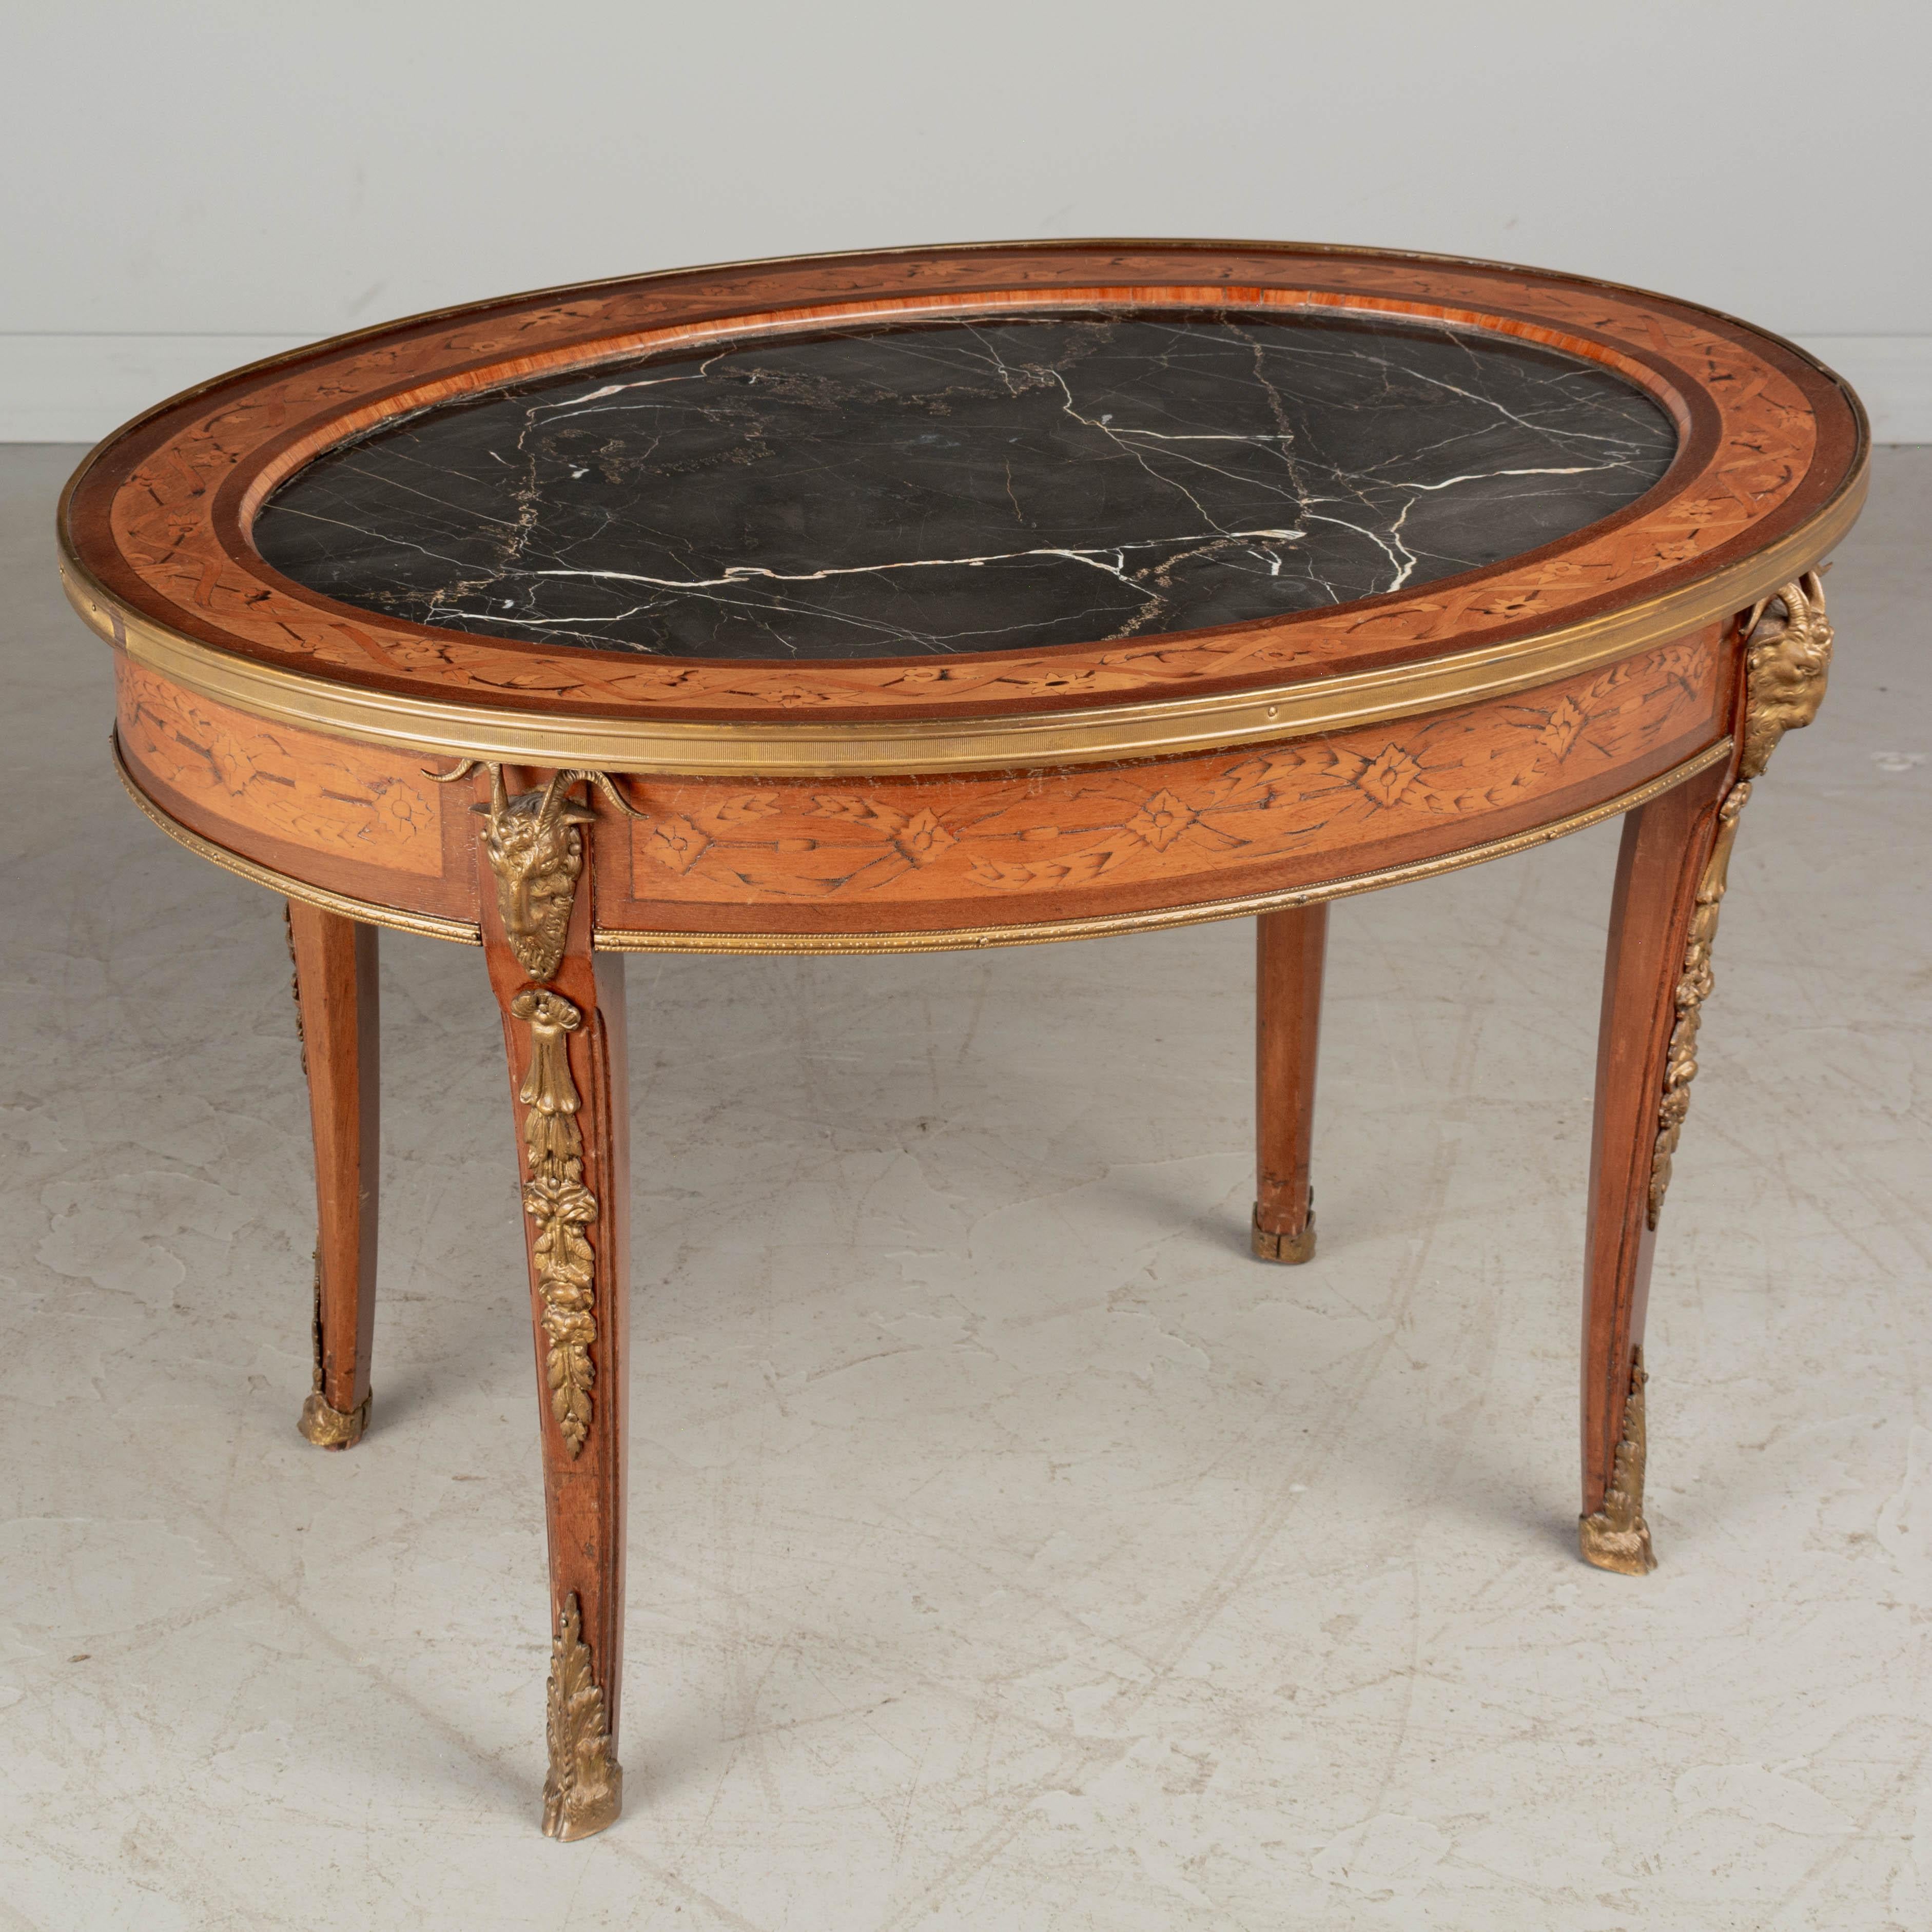 A French Louis XV style oval coffee table with marquetry veneer of mahogany and inset black marble top. Cast bronze decorative details and brass trim. All original. Circa 1920s. 
Dimensions: 30.25